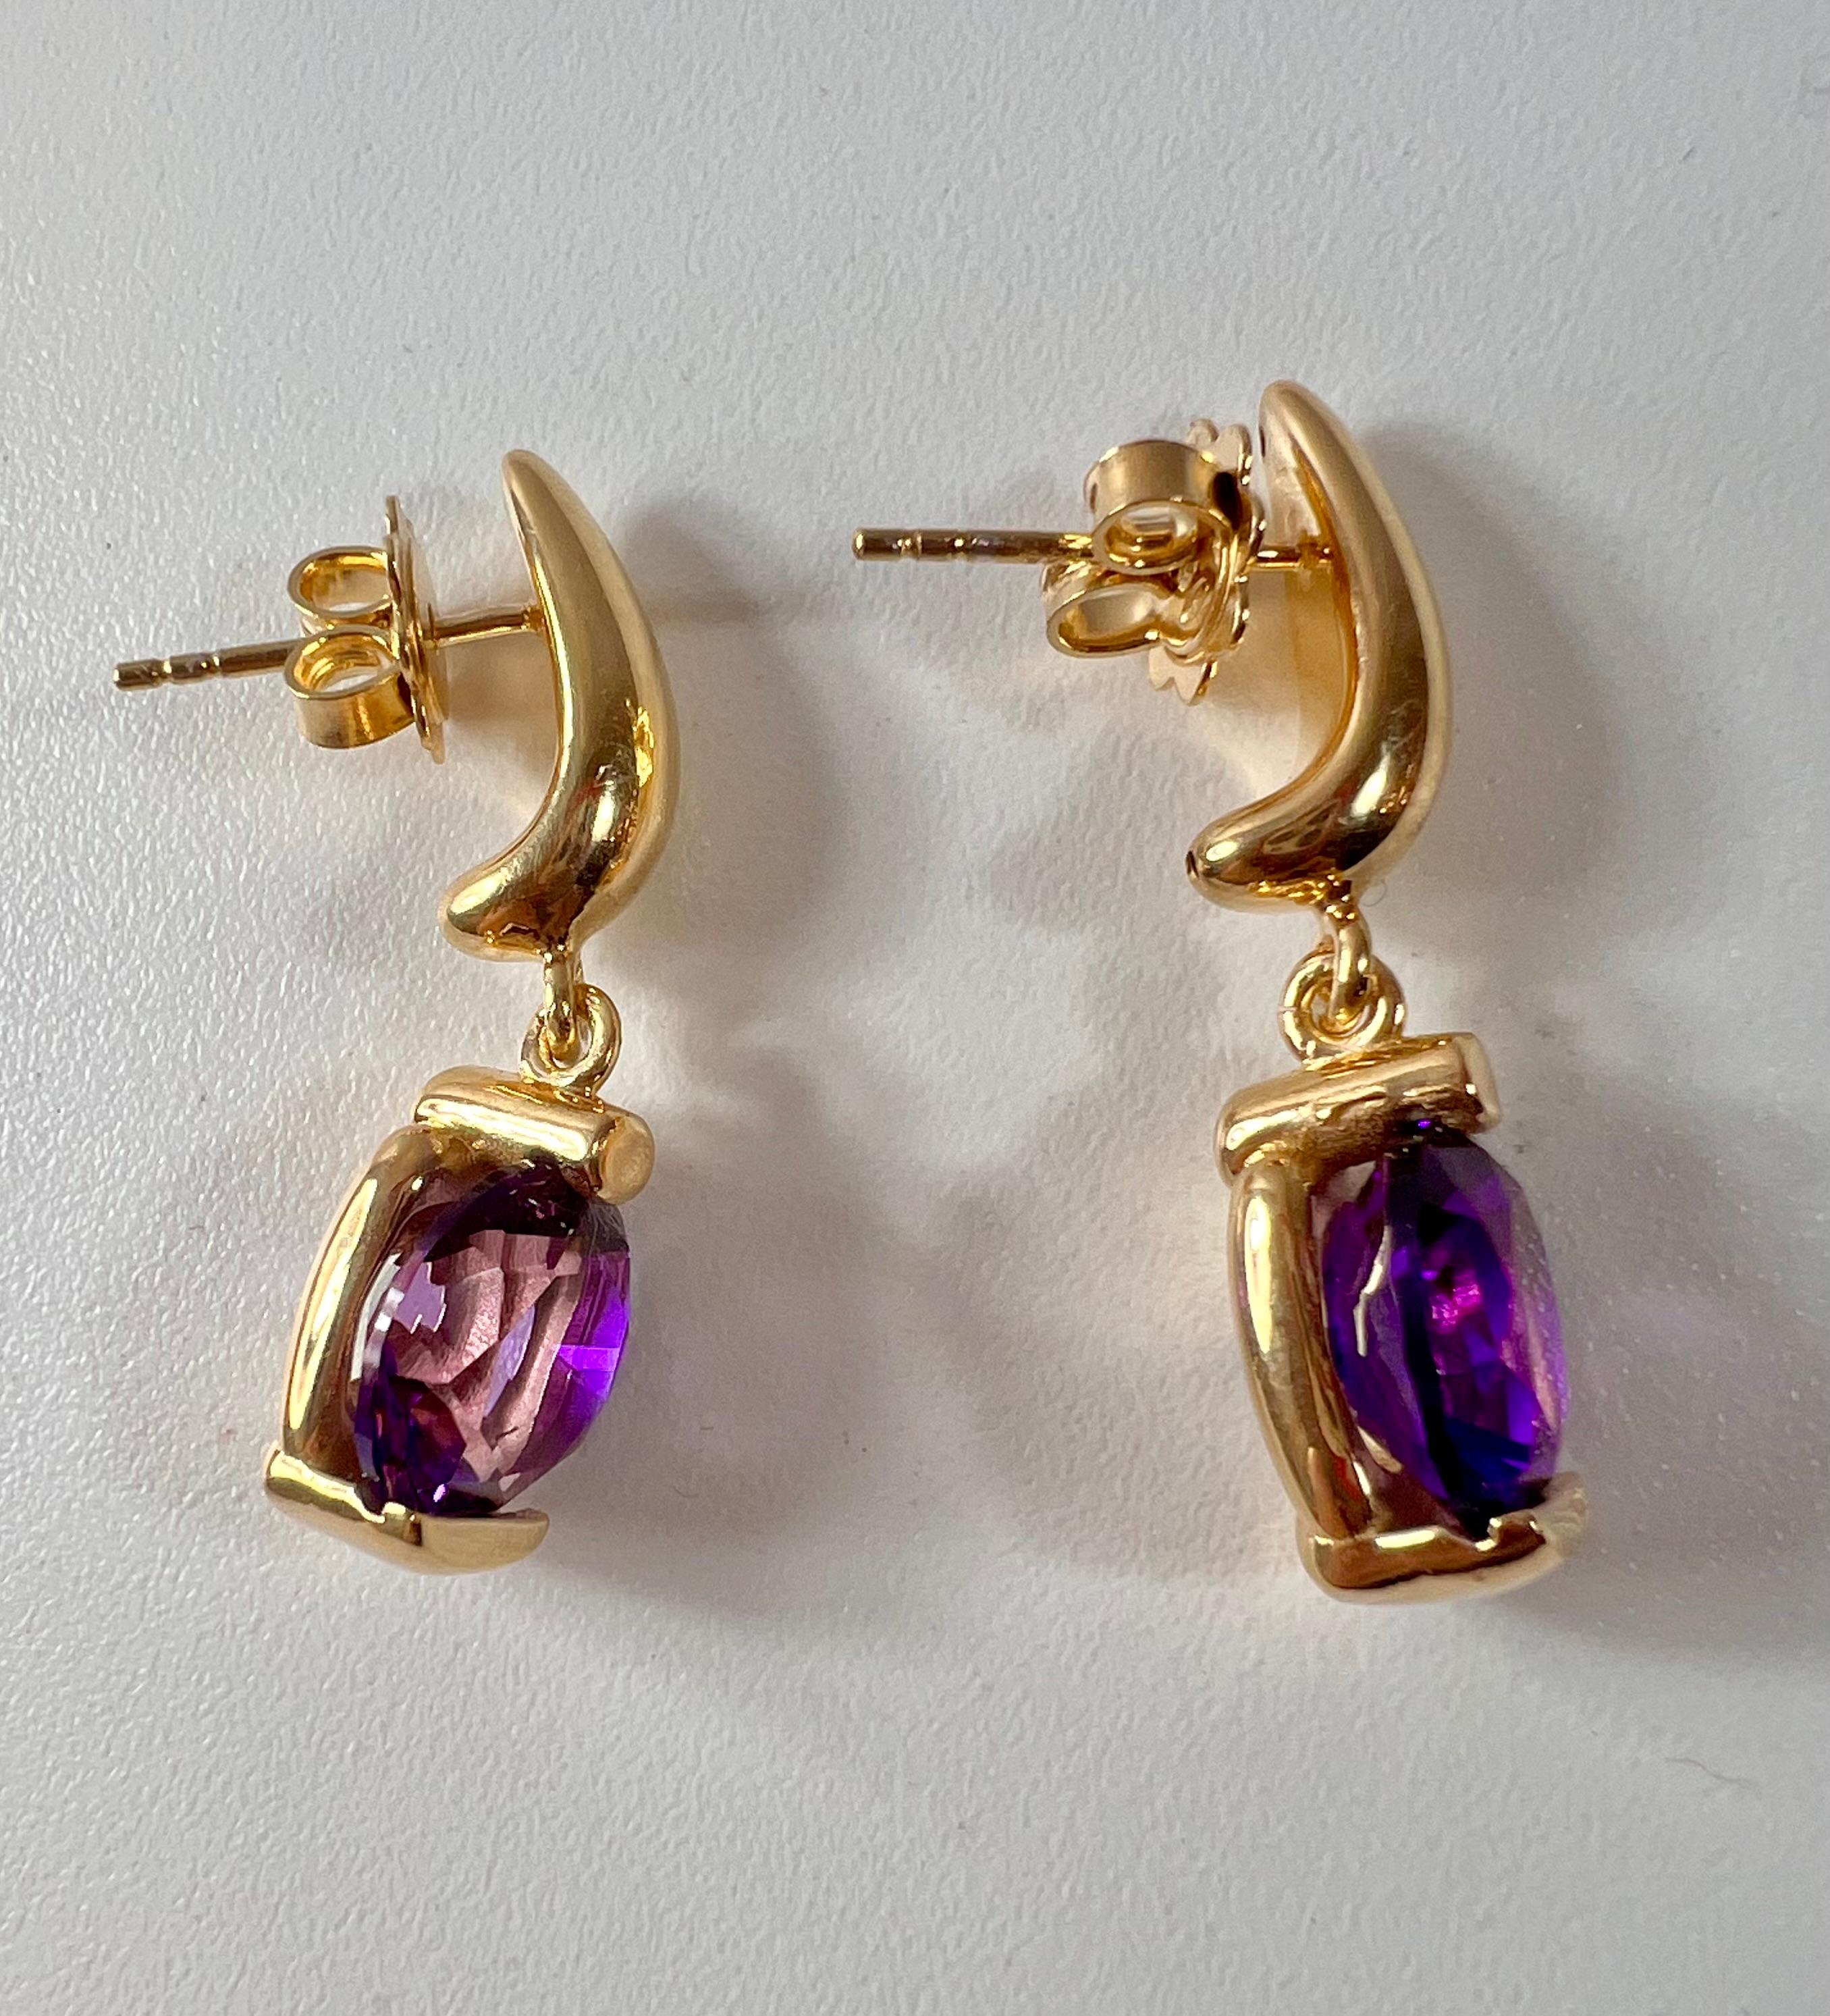 Long Earrings with brilliant cut quartz stones in gold plated silver  7